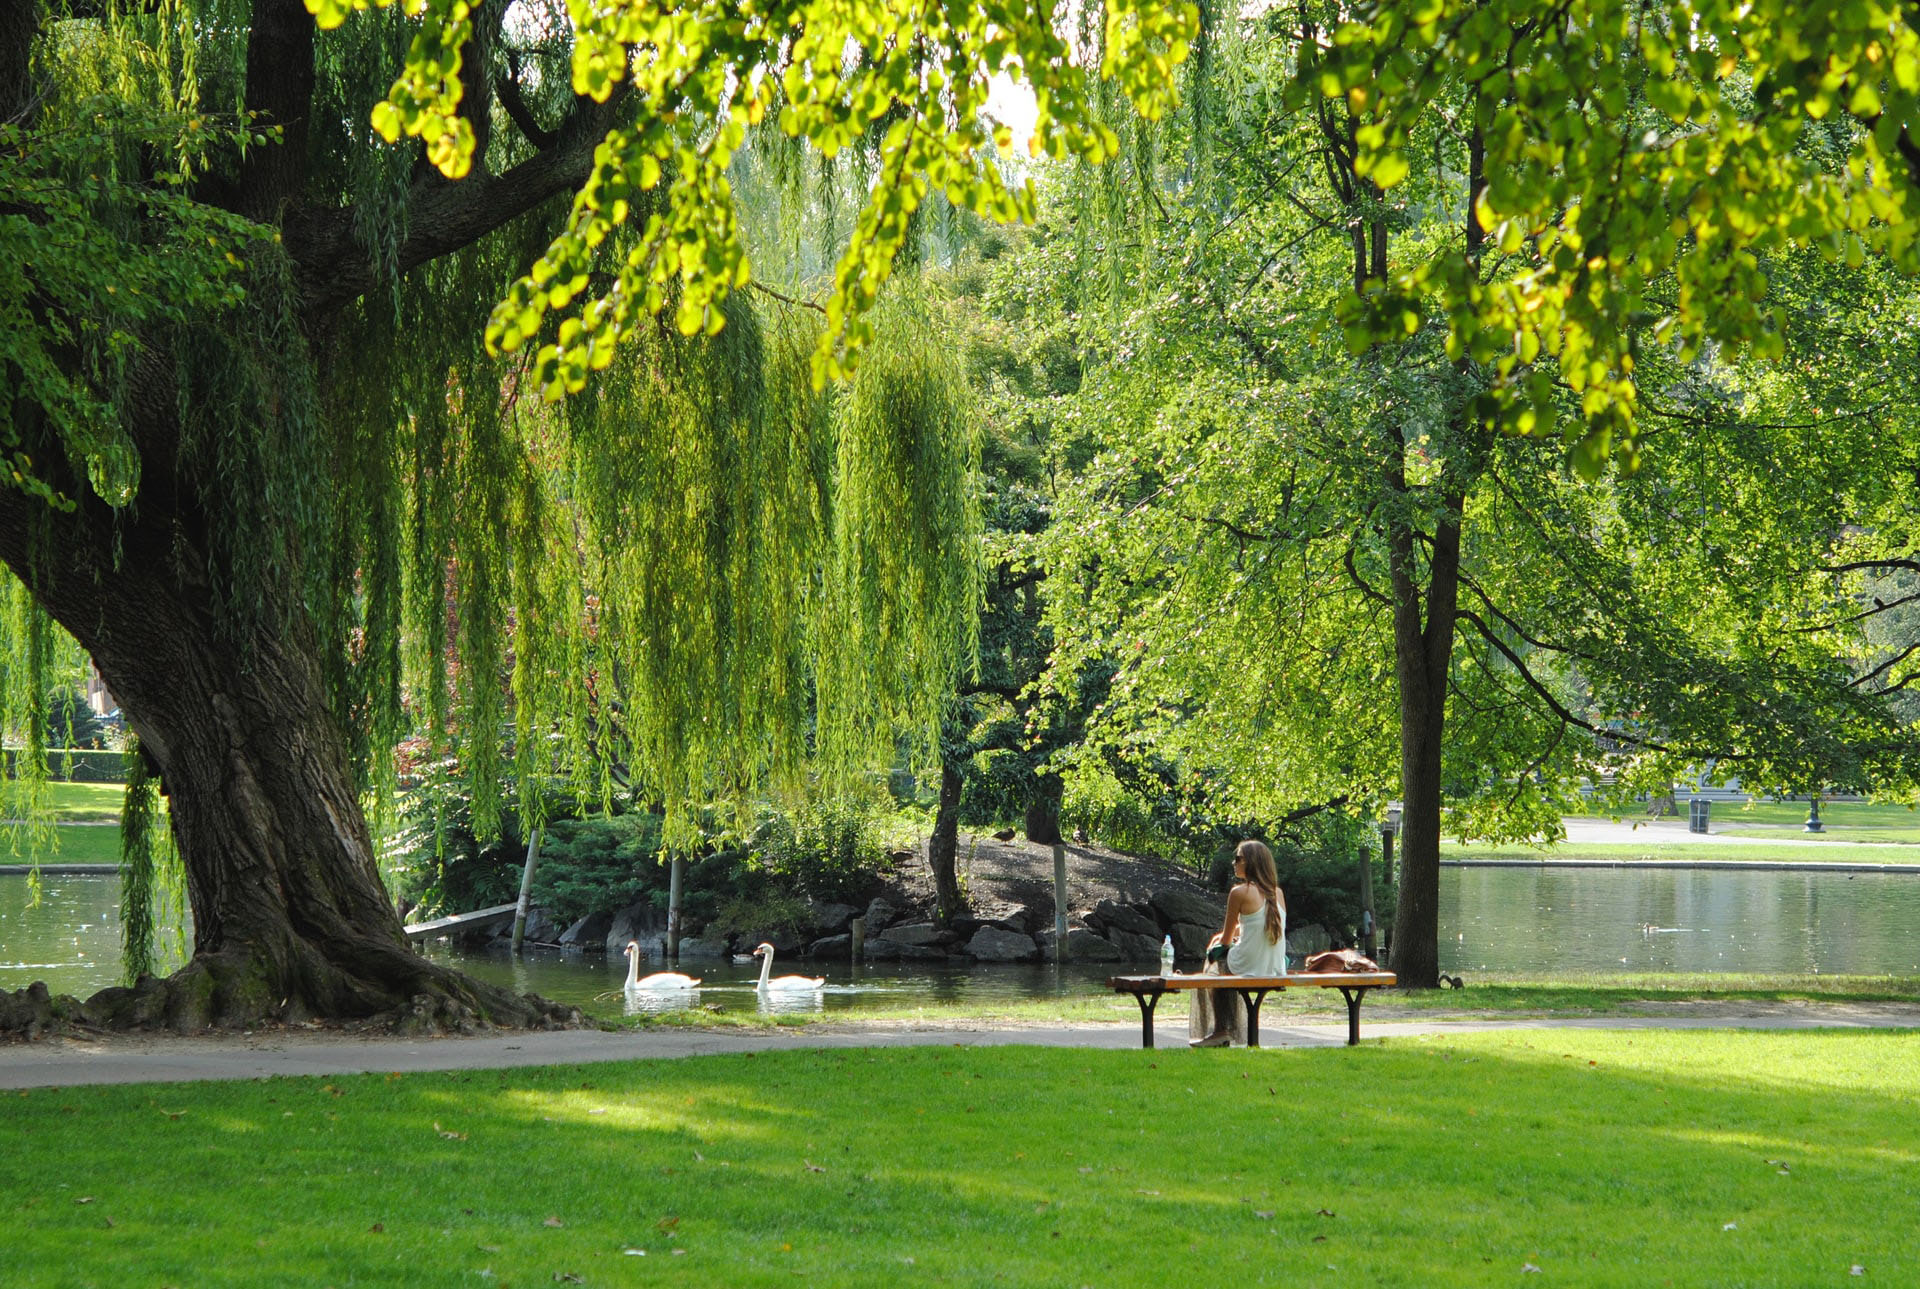 Woman sitting on a bench in a park in summer